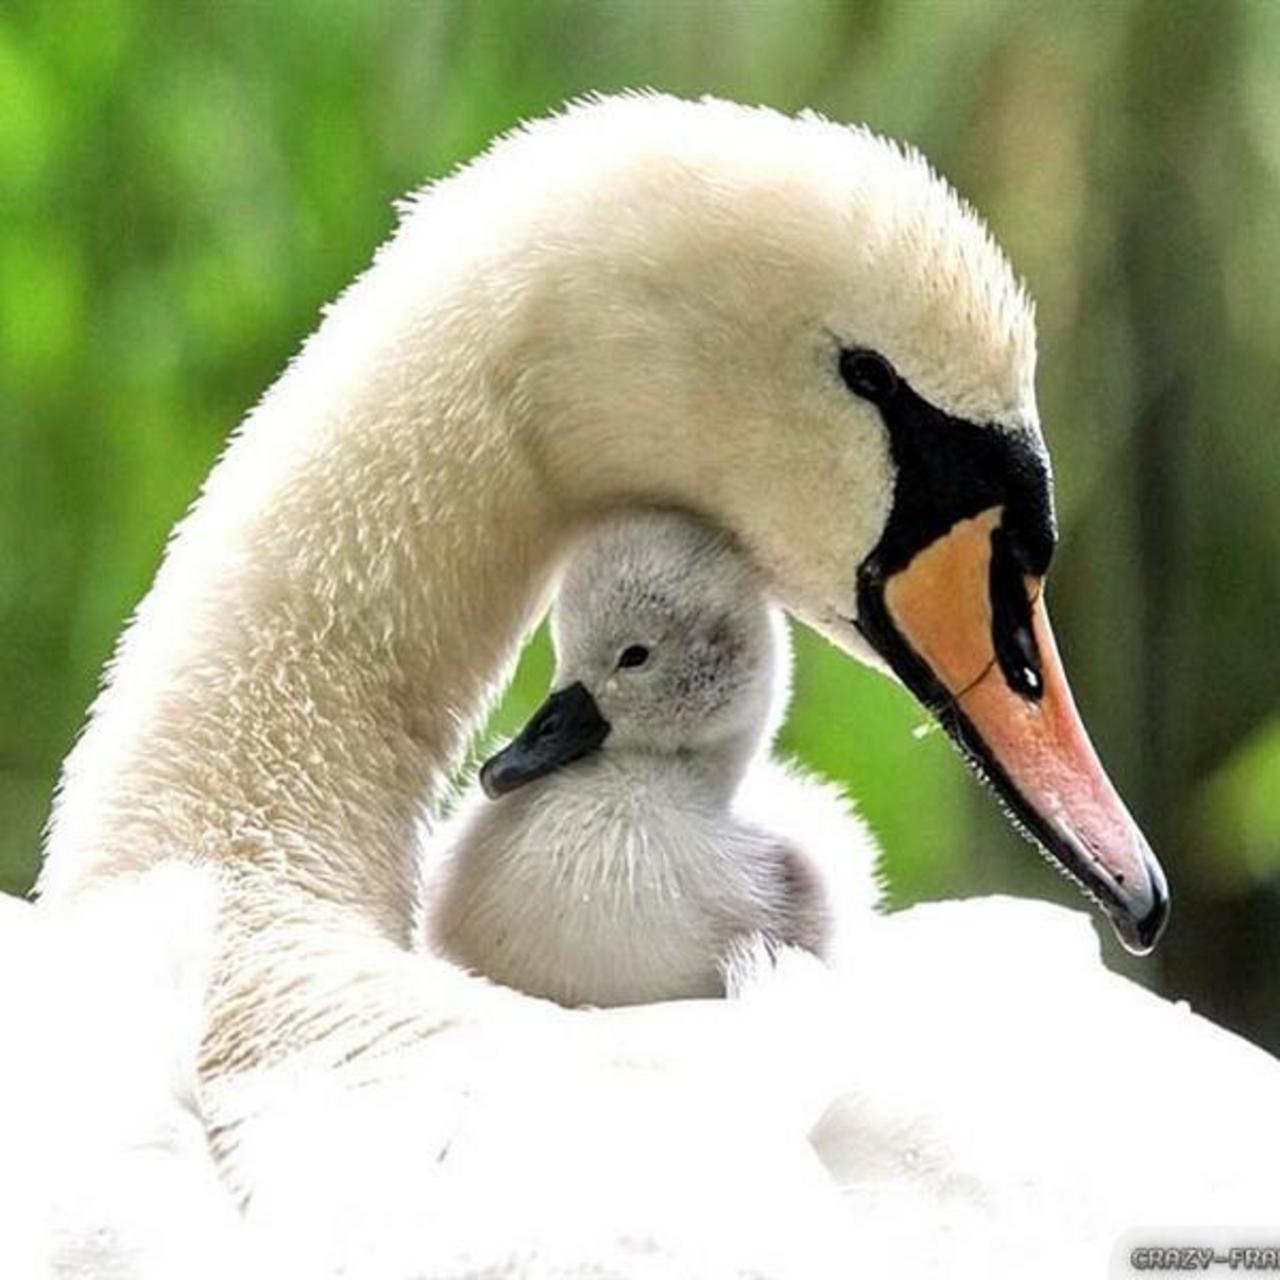 Mother and baby. http://t.co/5ZtHUjRlfl #nature #animals